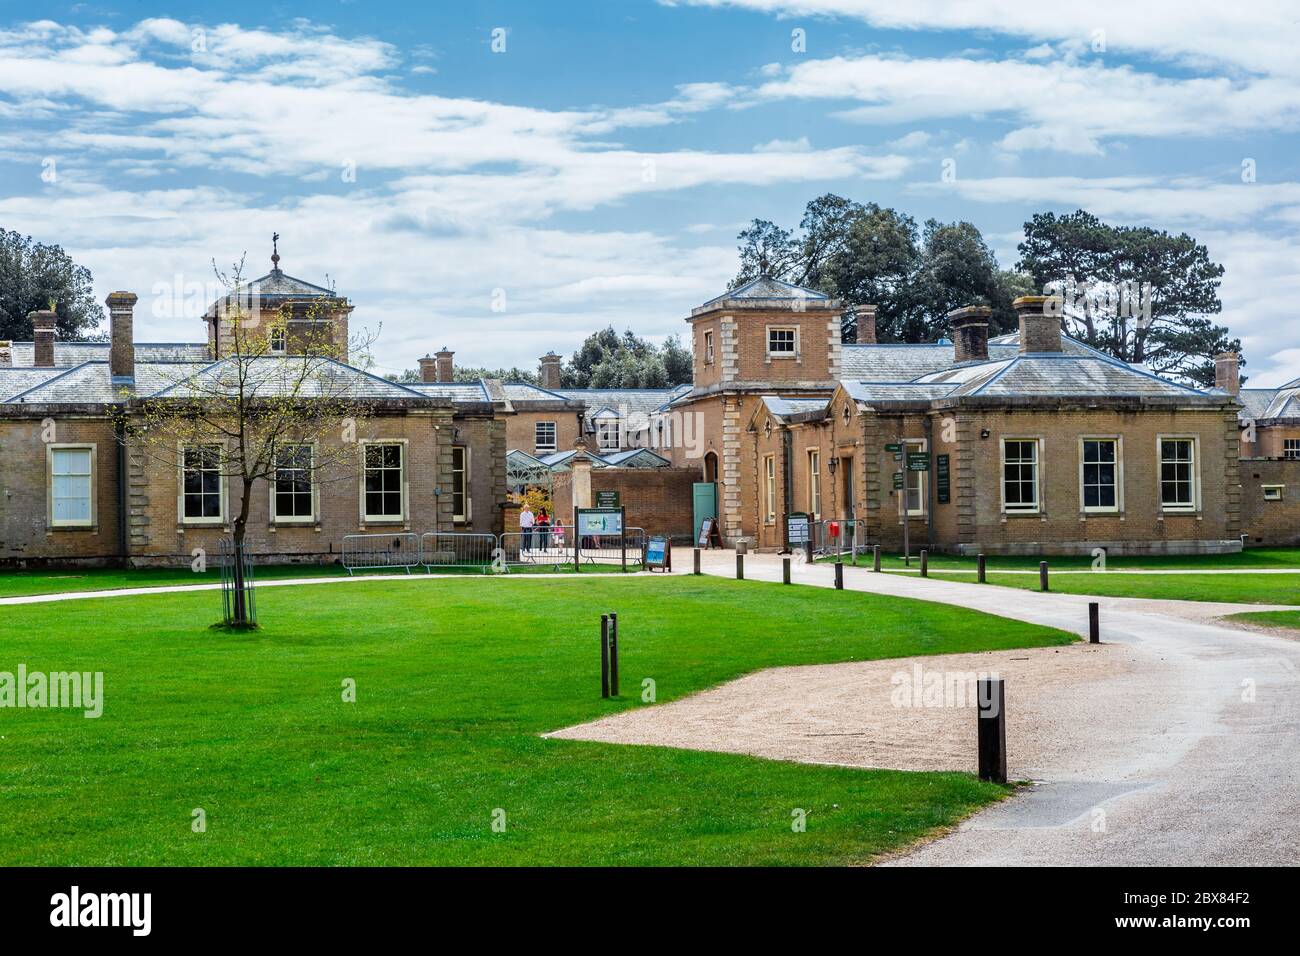 Holkham, Norfolk, England, April 23, 2019: Holkham Hall visitors' centre. Holkham Hall is an 18th-century country house. Stock Photo